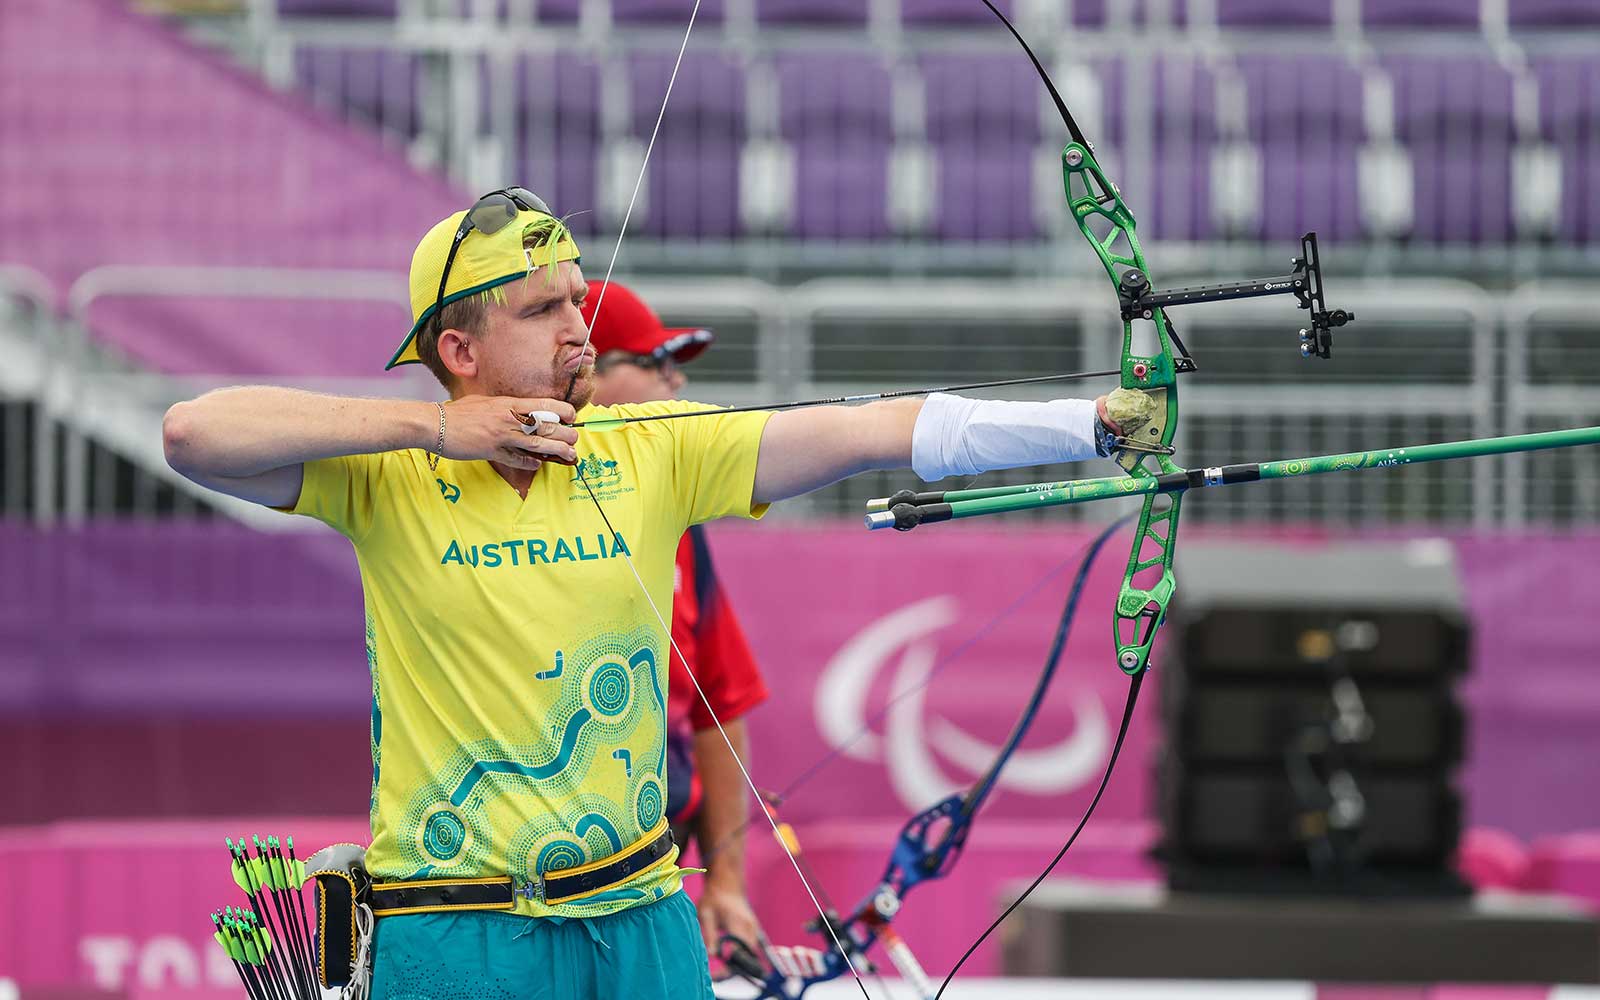 Australian Paralympian Taymon Kenton-Smith is wearing his green and gold Australian uniform. He is competing in an archery competition and aiming his arrow at the target ready to shoot.